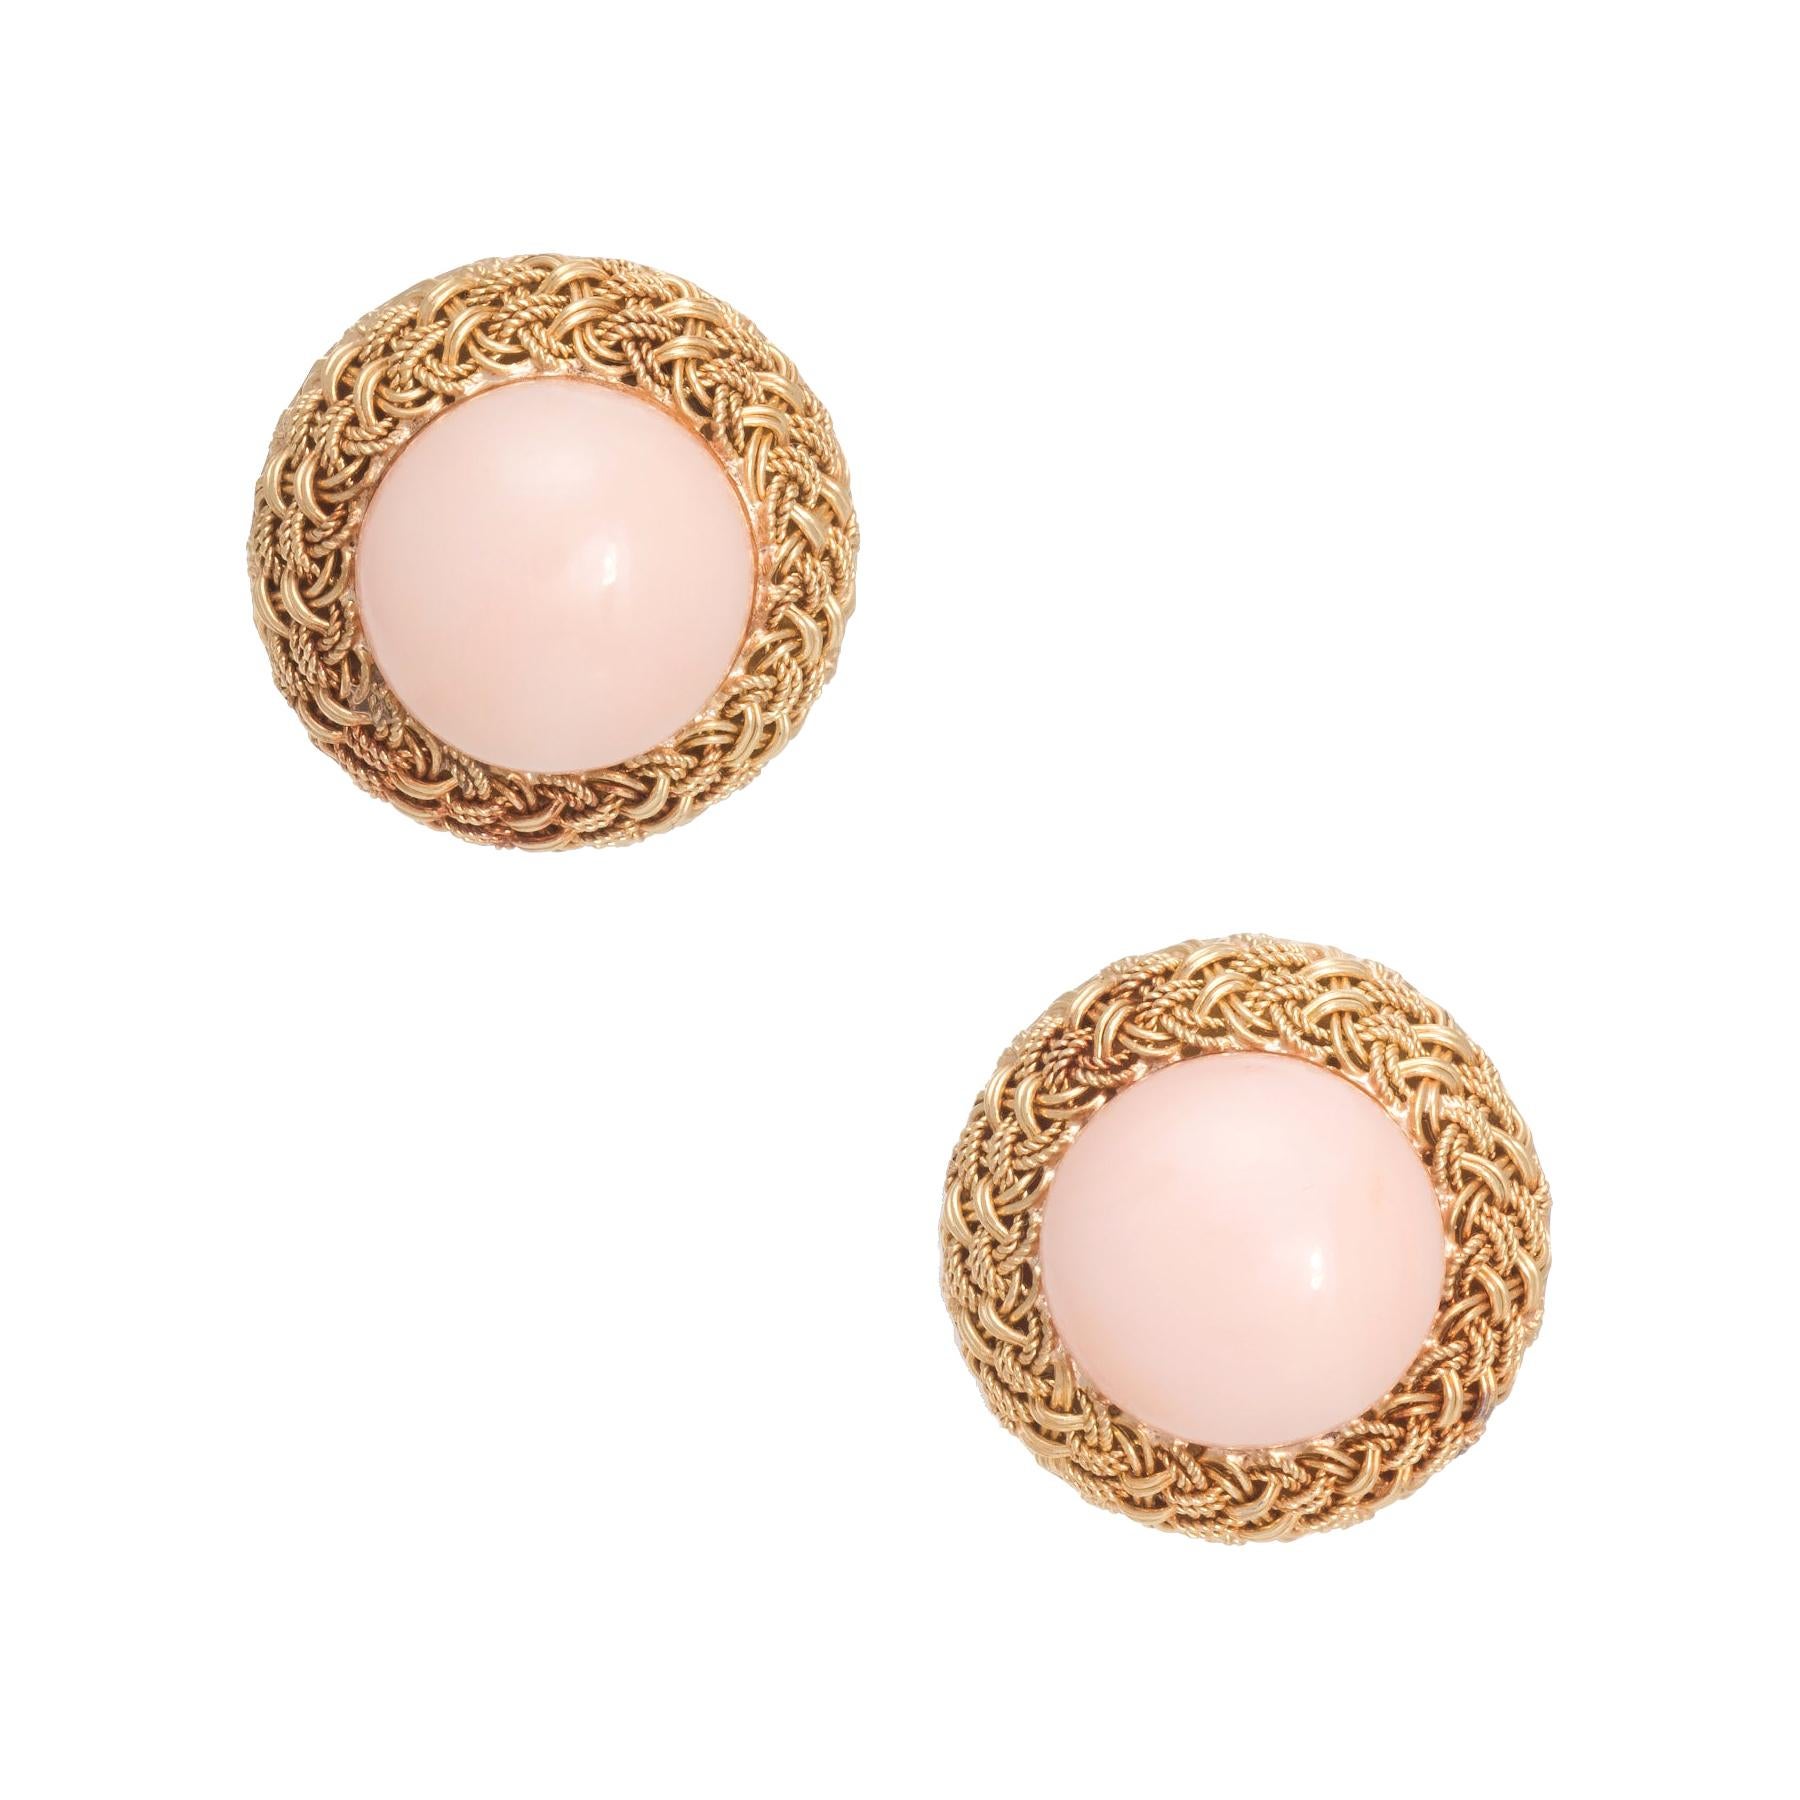 Angel Skin Coral Round Earrings Vintage 18 Karat Yellow Gold Estate Fine Jewelry For Sale